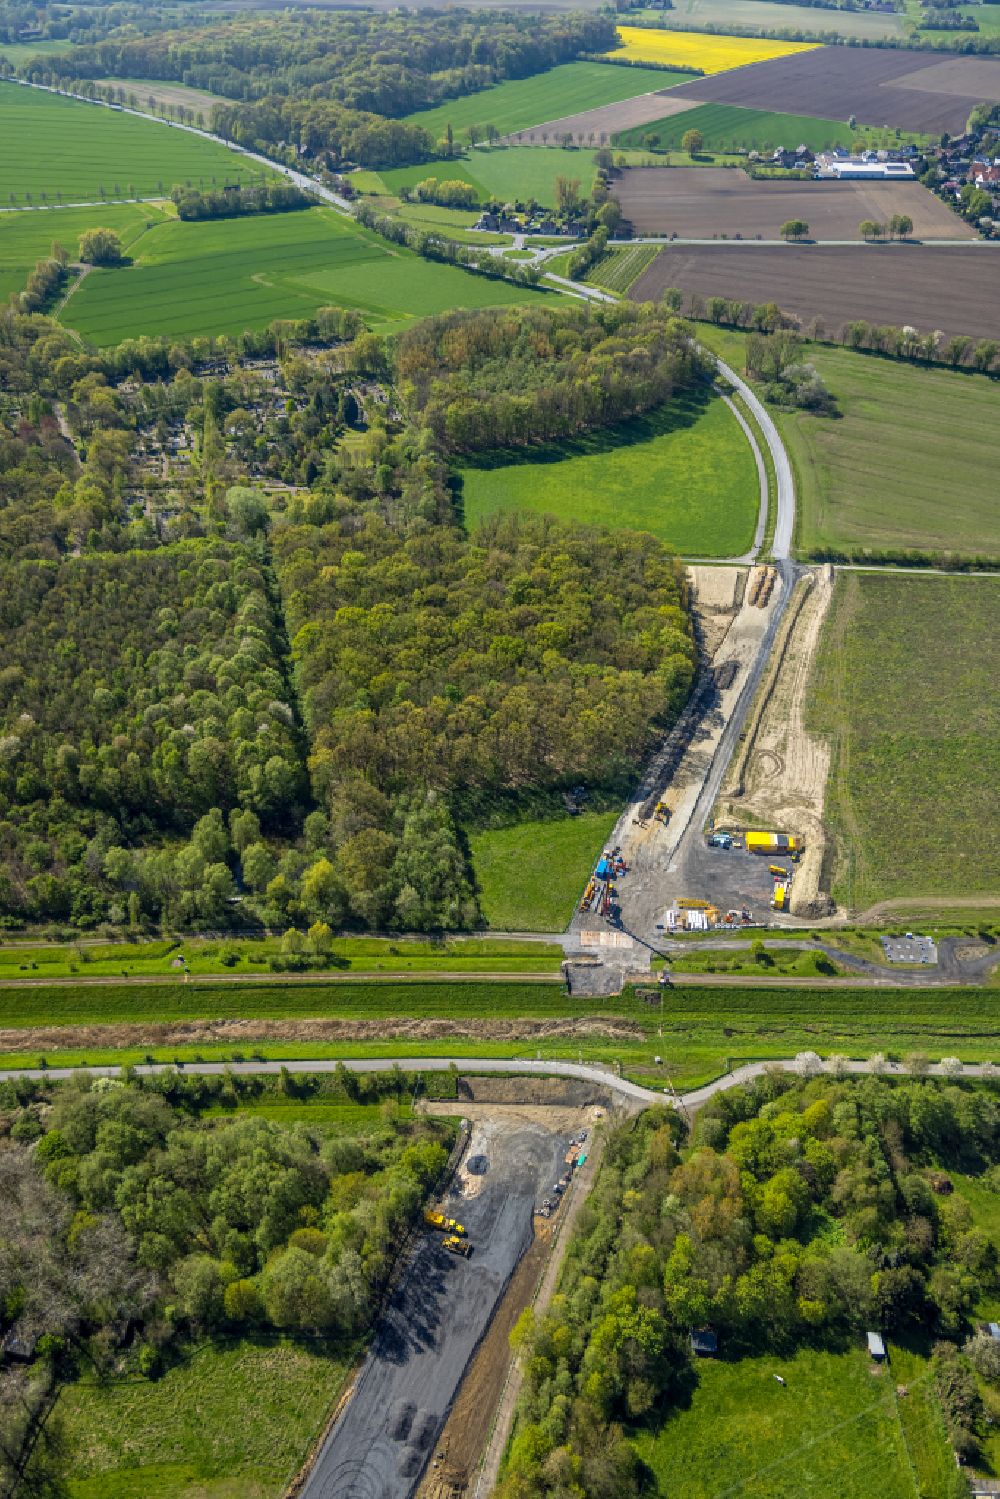 Bergkamen from above - Construction of the bypass road in the course of the L821n between Erich-Ollenhauer-Strasse and Luenener Strasse in Bergkamen at Ruhrgebiet in the state North Rhine-Westphalia, Germany